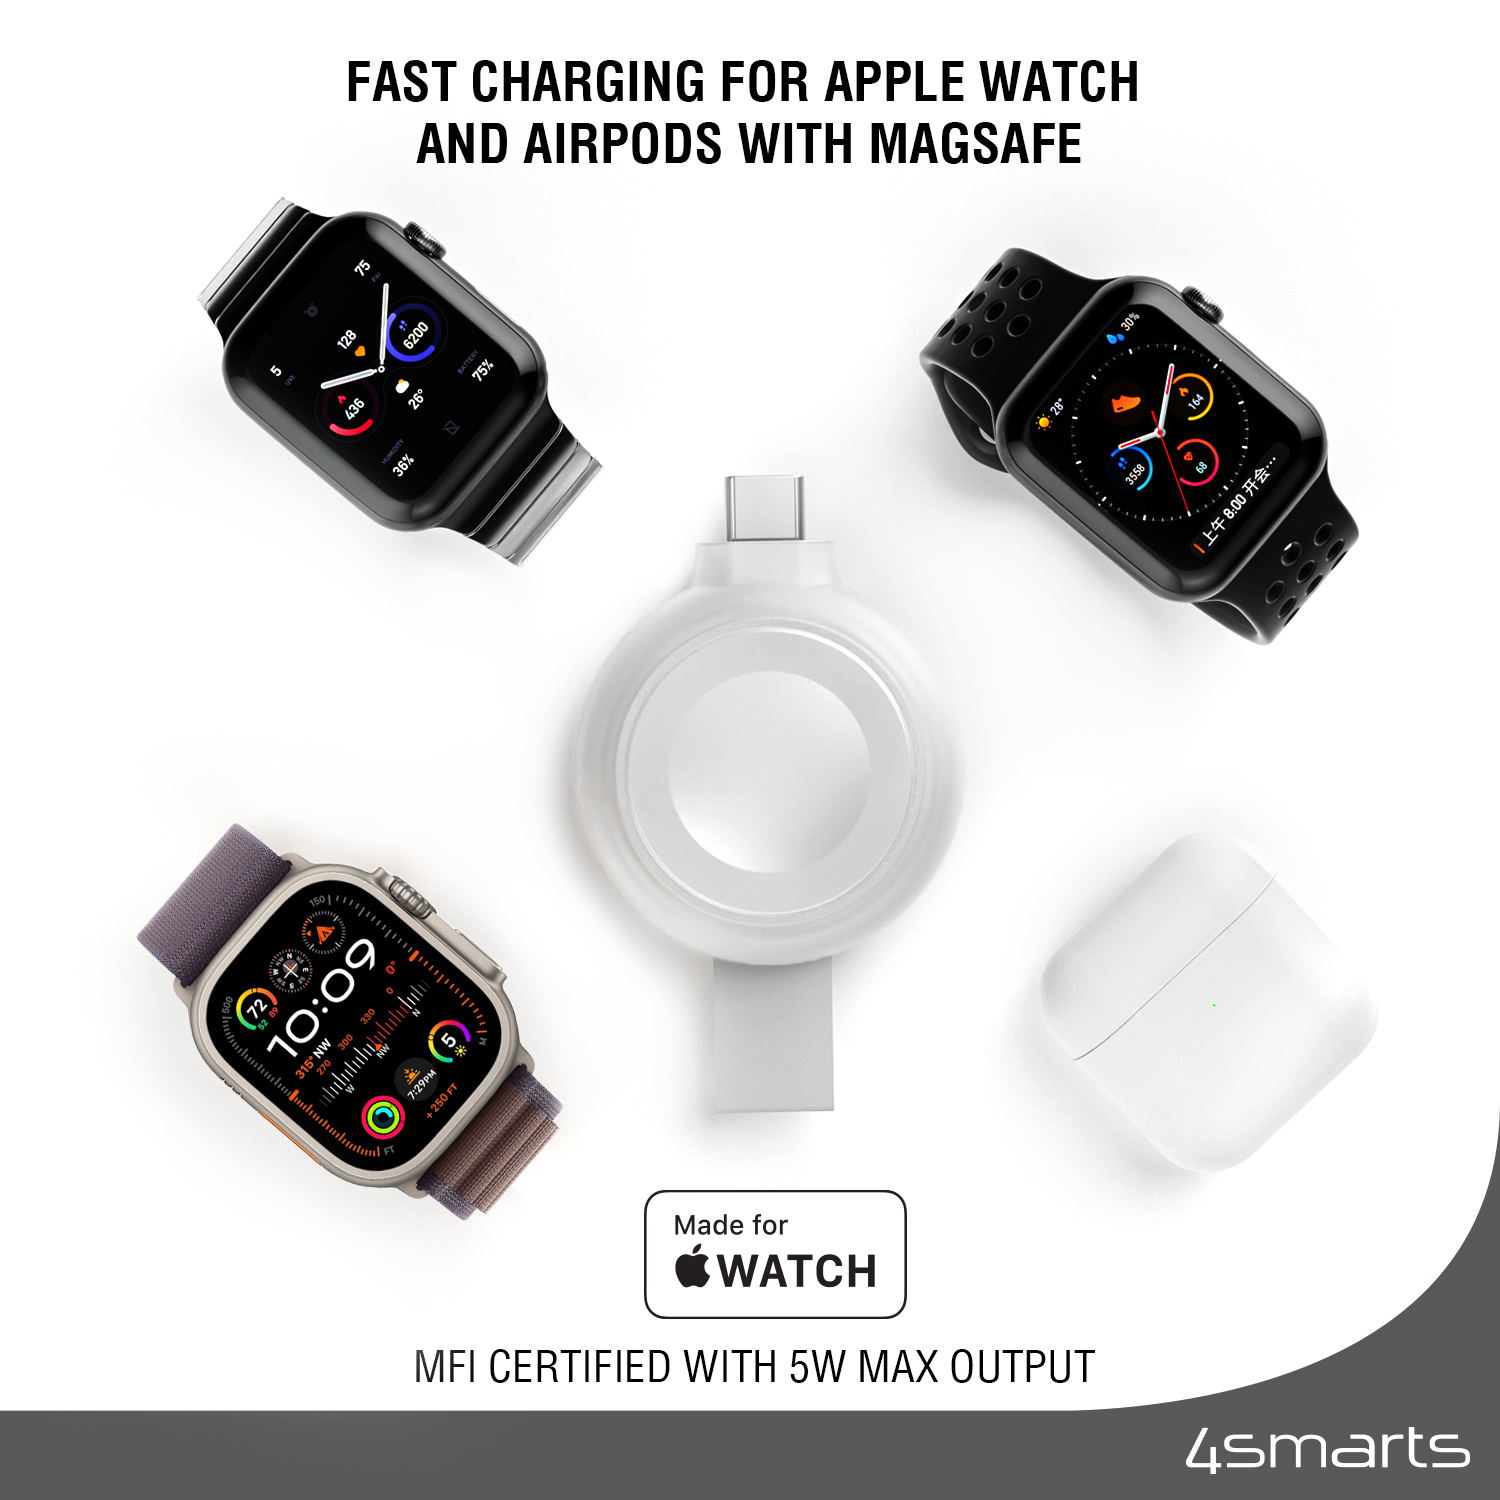 The 4smarts MFi Fast Charger also supports MagSafe fast charging for Apple Watch and AirPods.